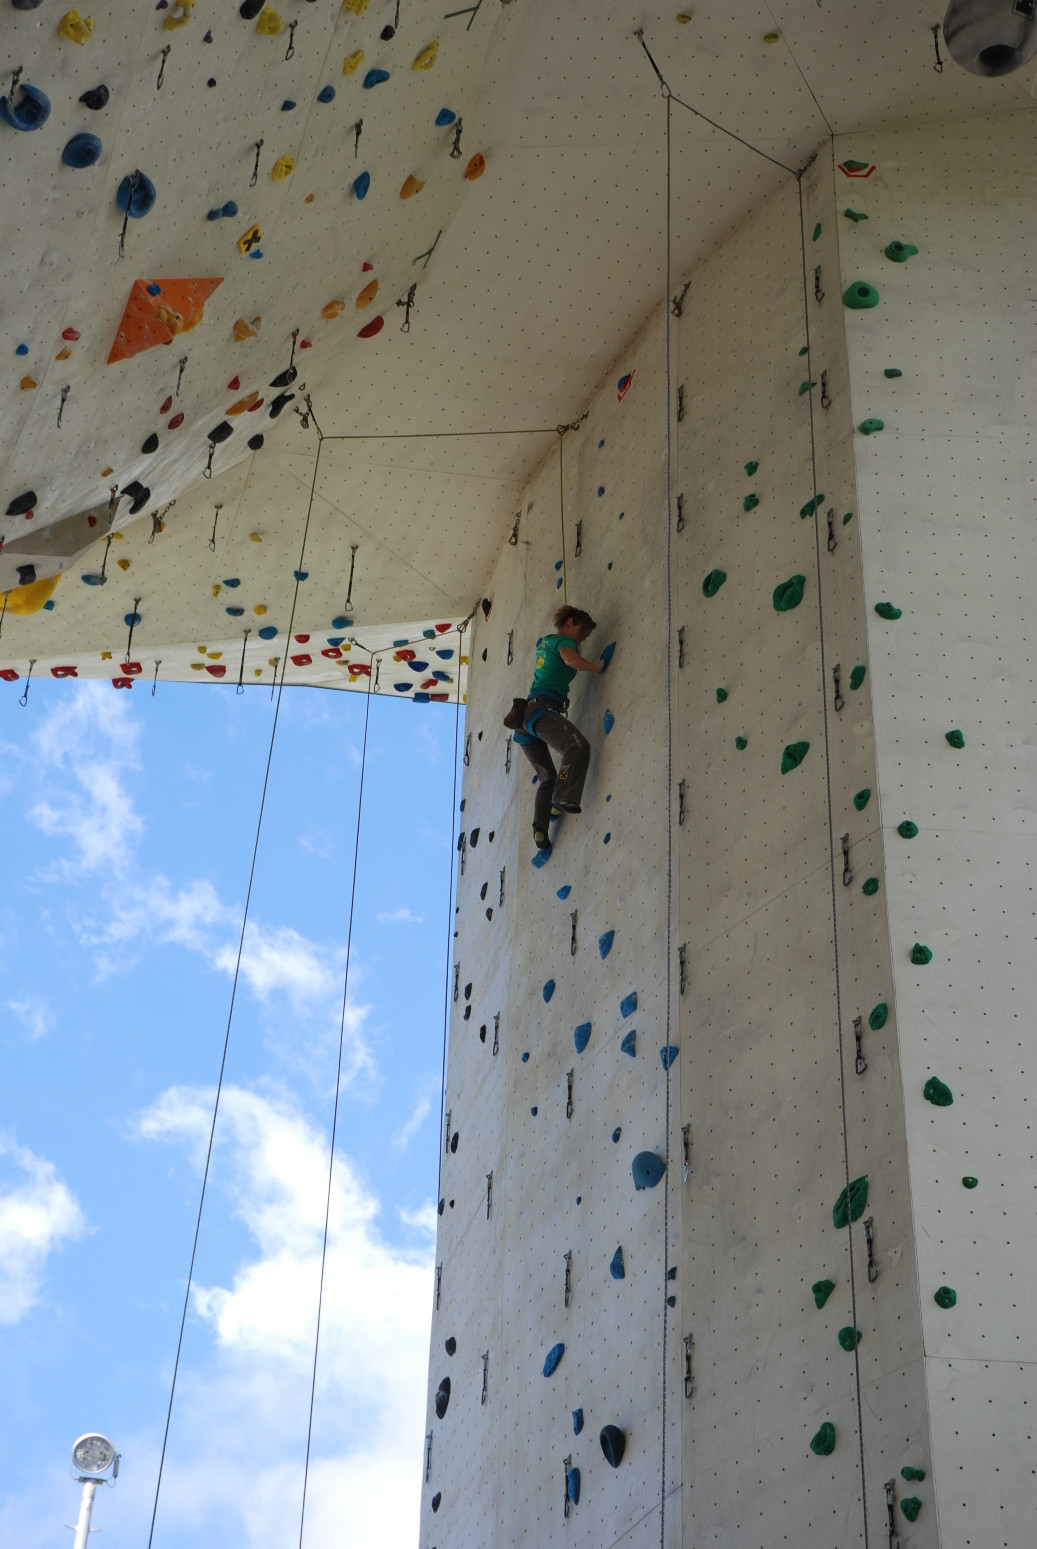 Imst has previously hosted Paraclimbing events ©Kletterzentrum